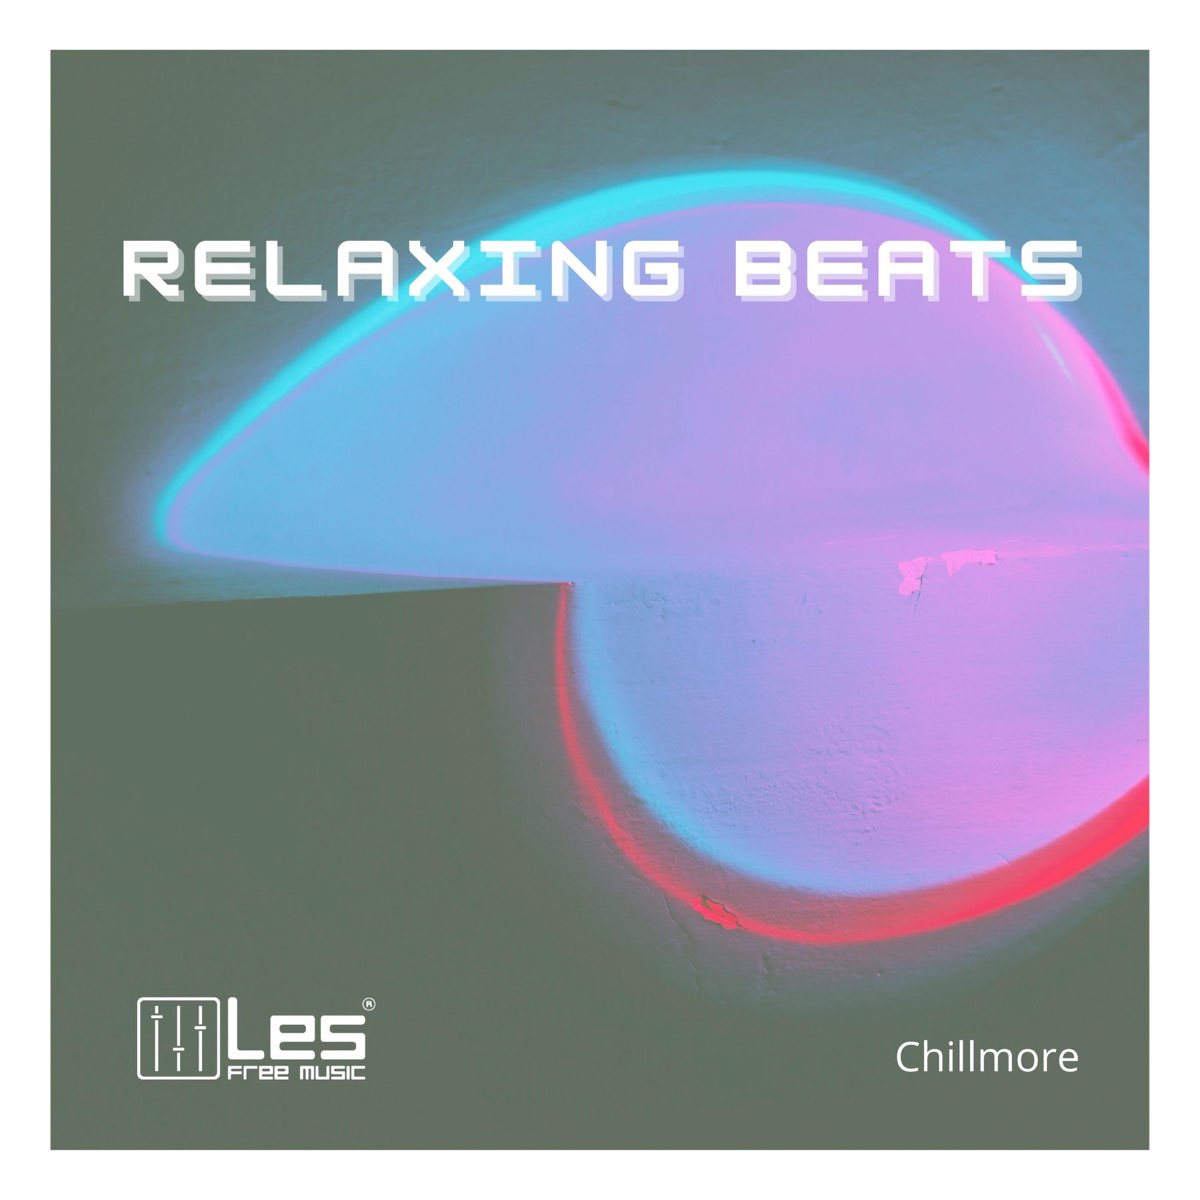 Relaxing Beats Single by Lesfm & on Apple Music